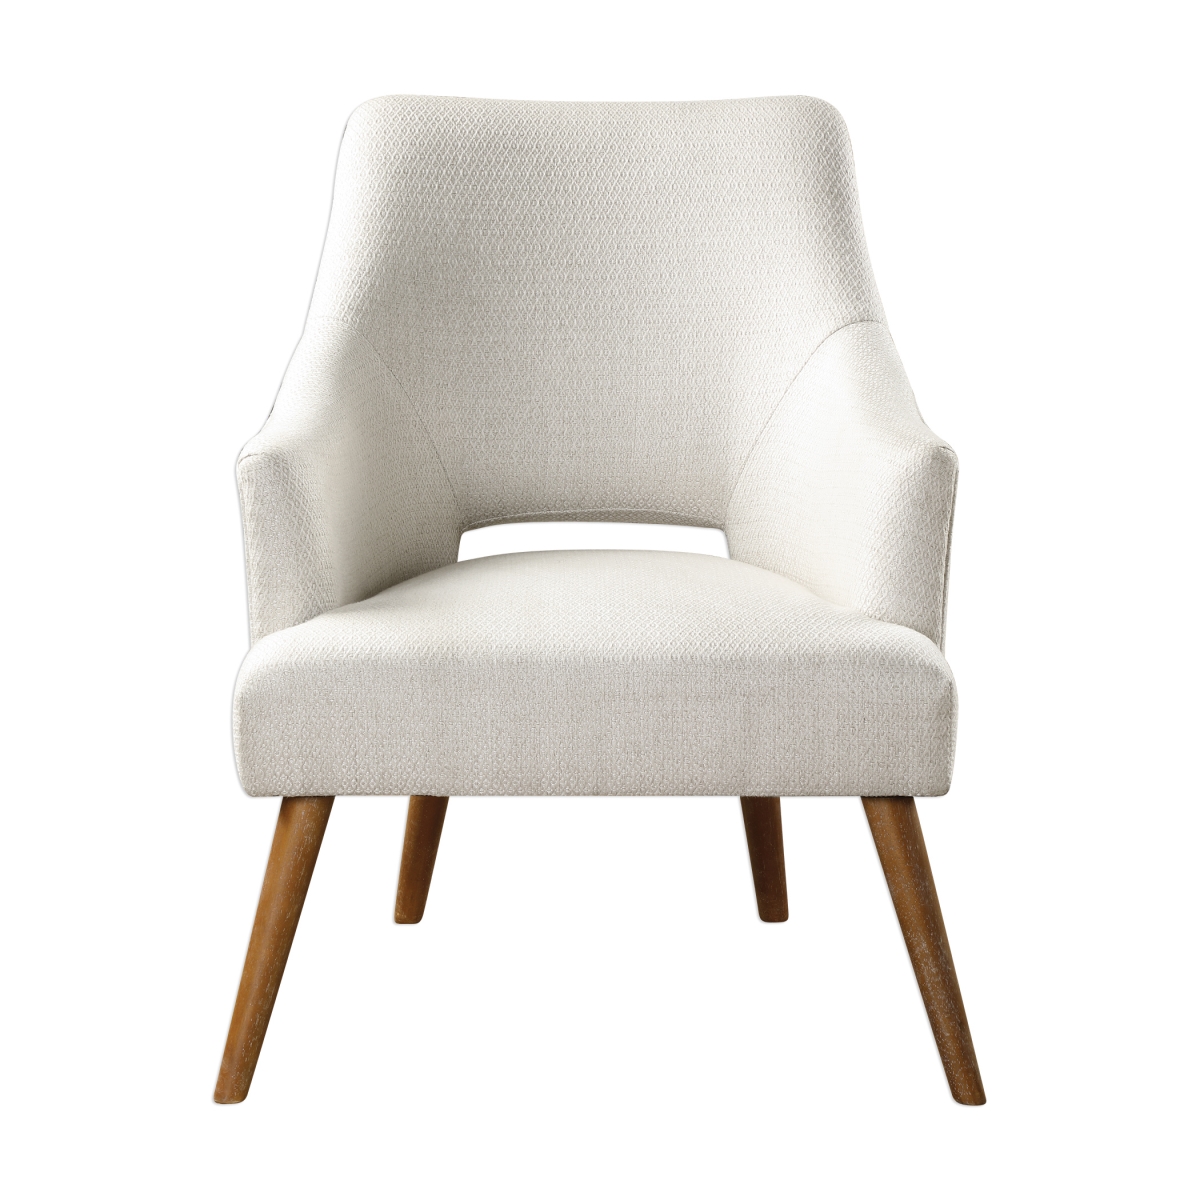 Picture of 212 Main 23424 Dree Retro Accent Chair